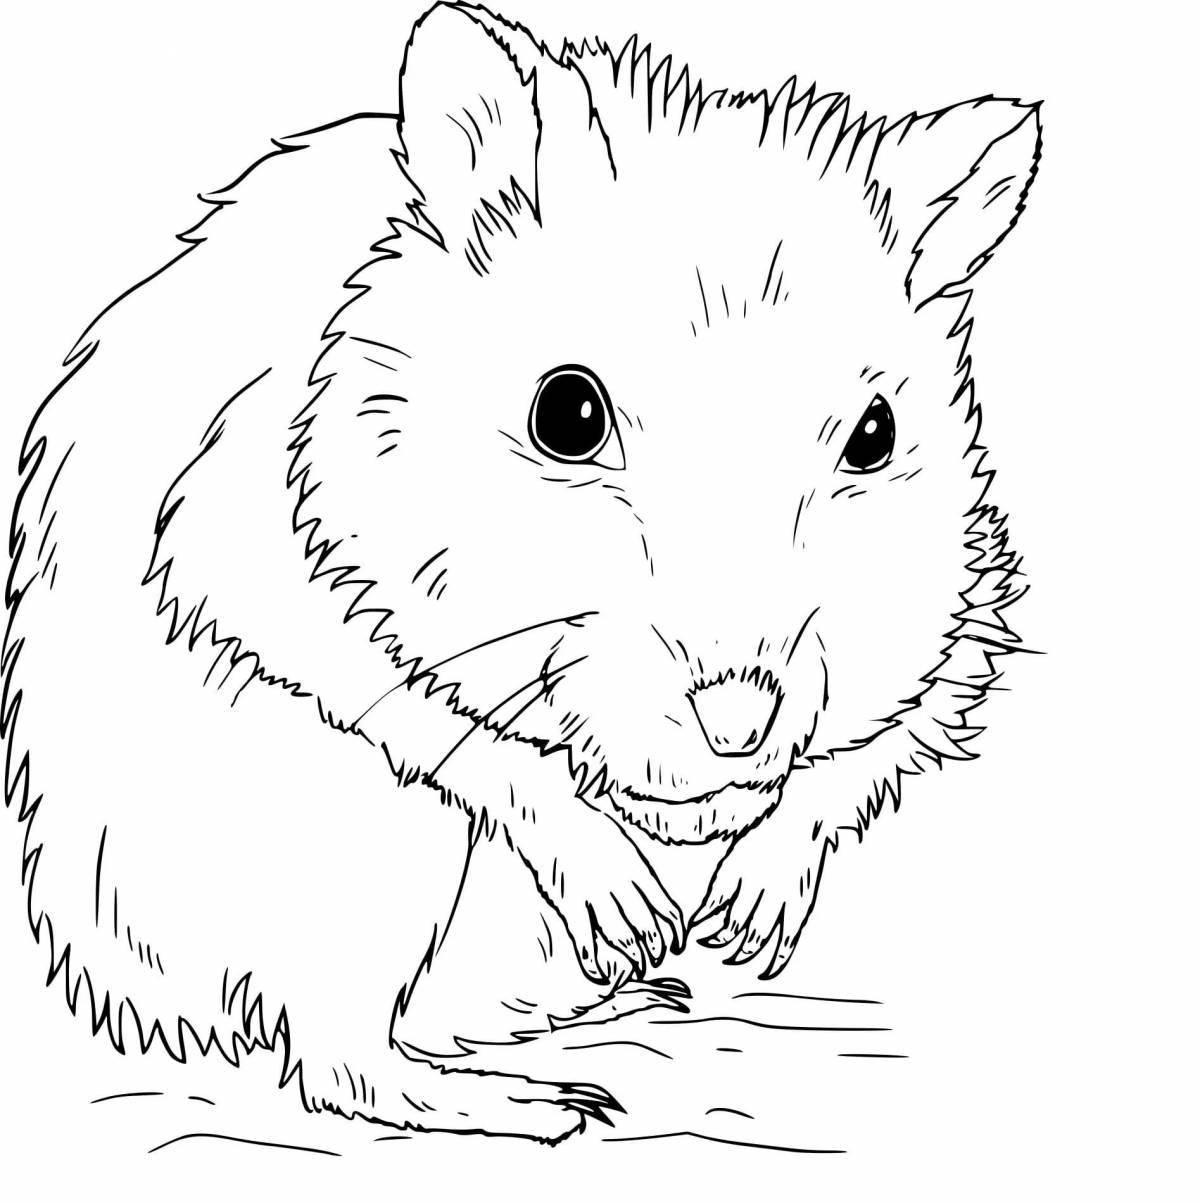 Creative hamster coloring for kids